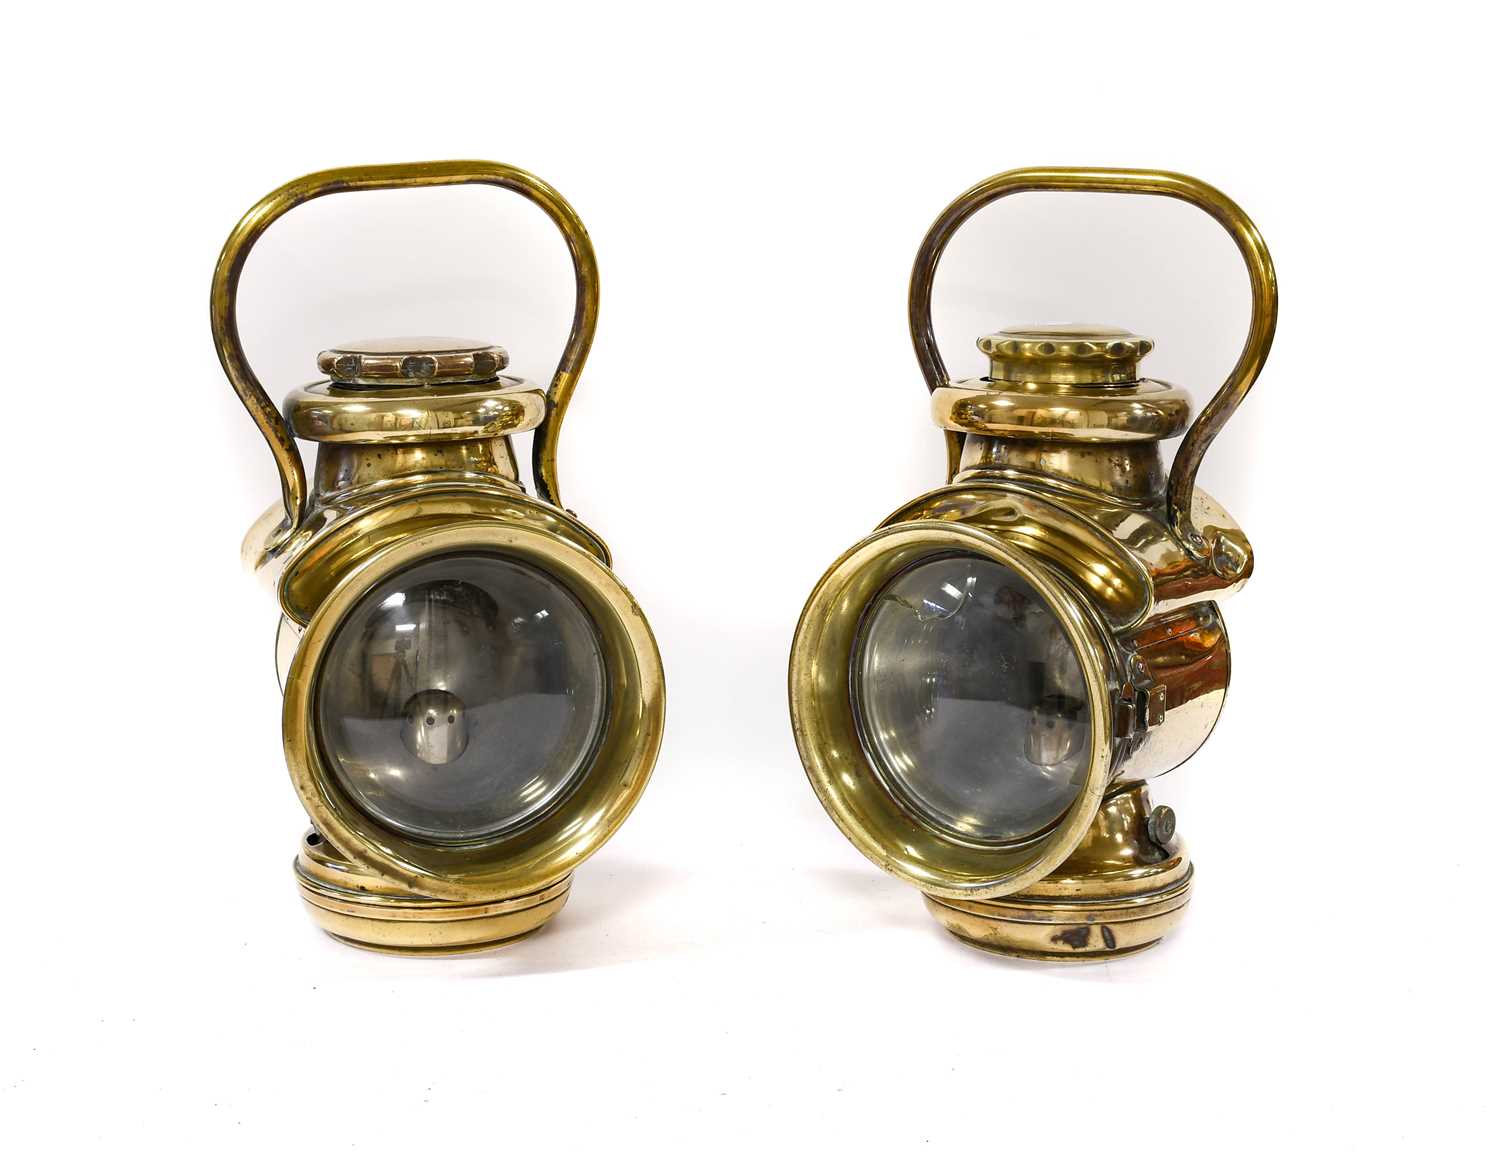 Lot 67 - A Pair of Early 20th Century Brass Carriage...